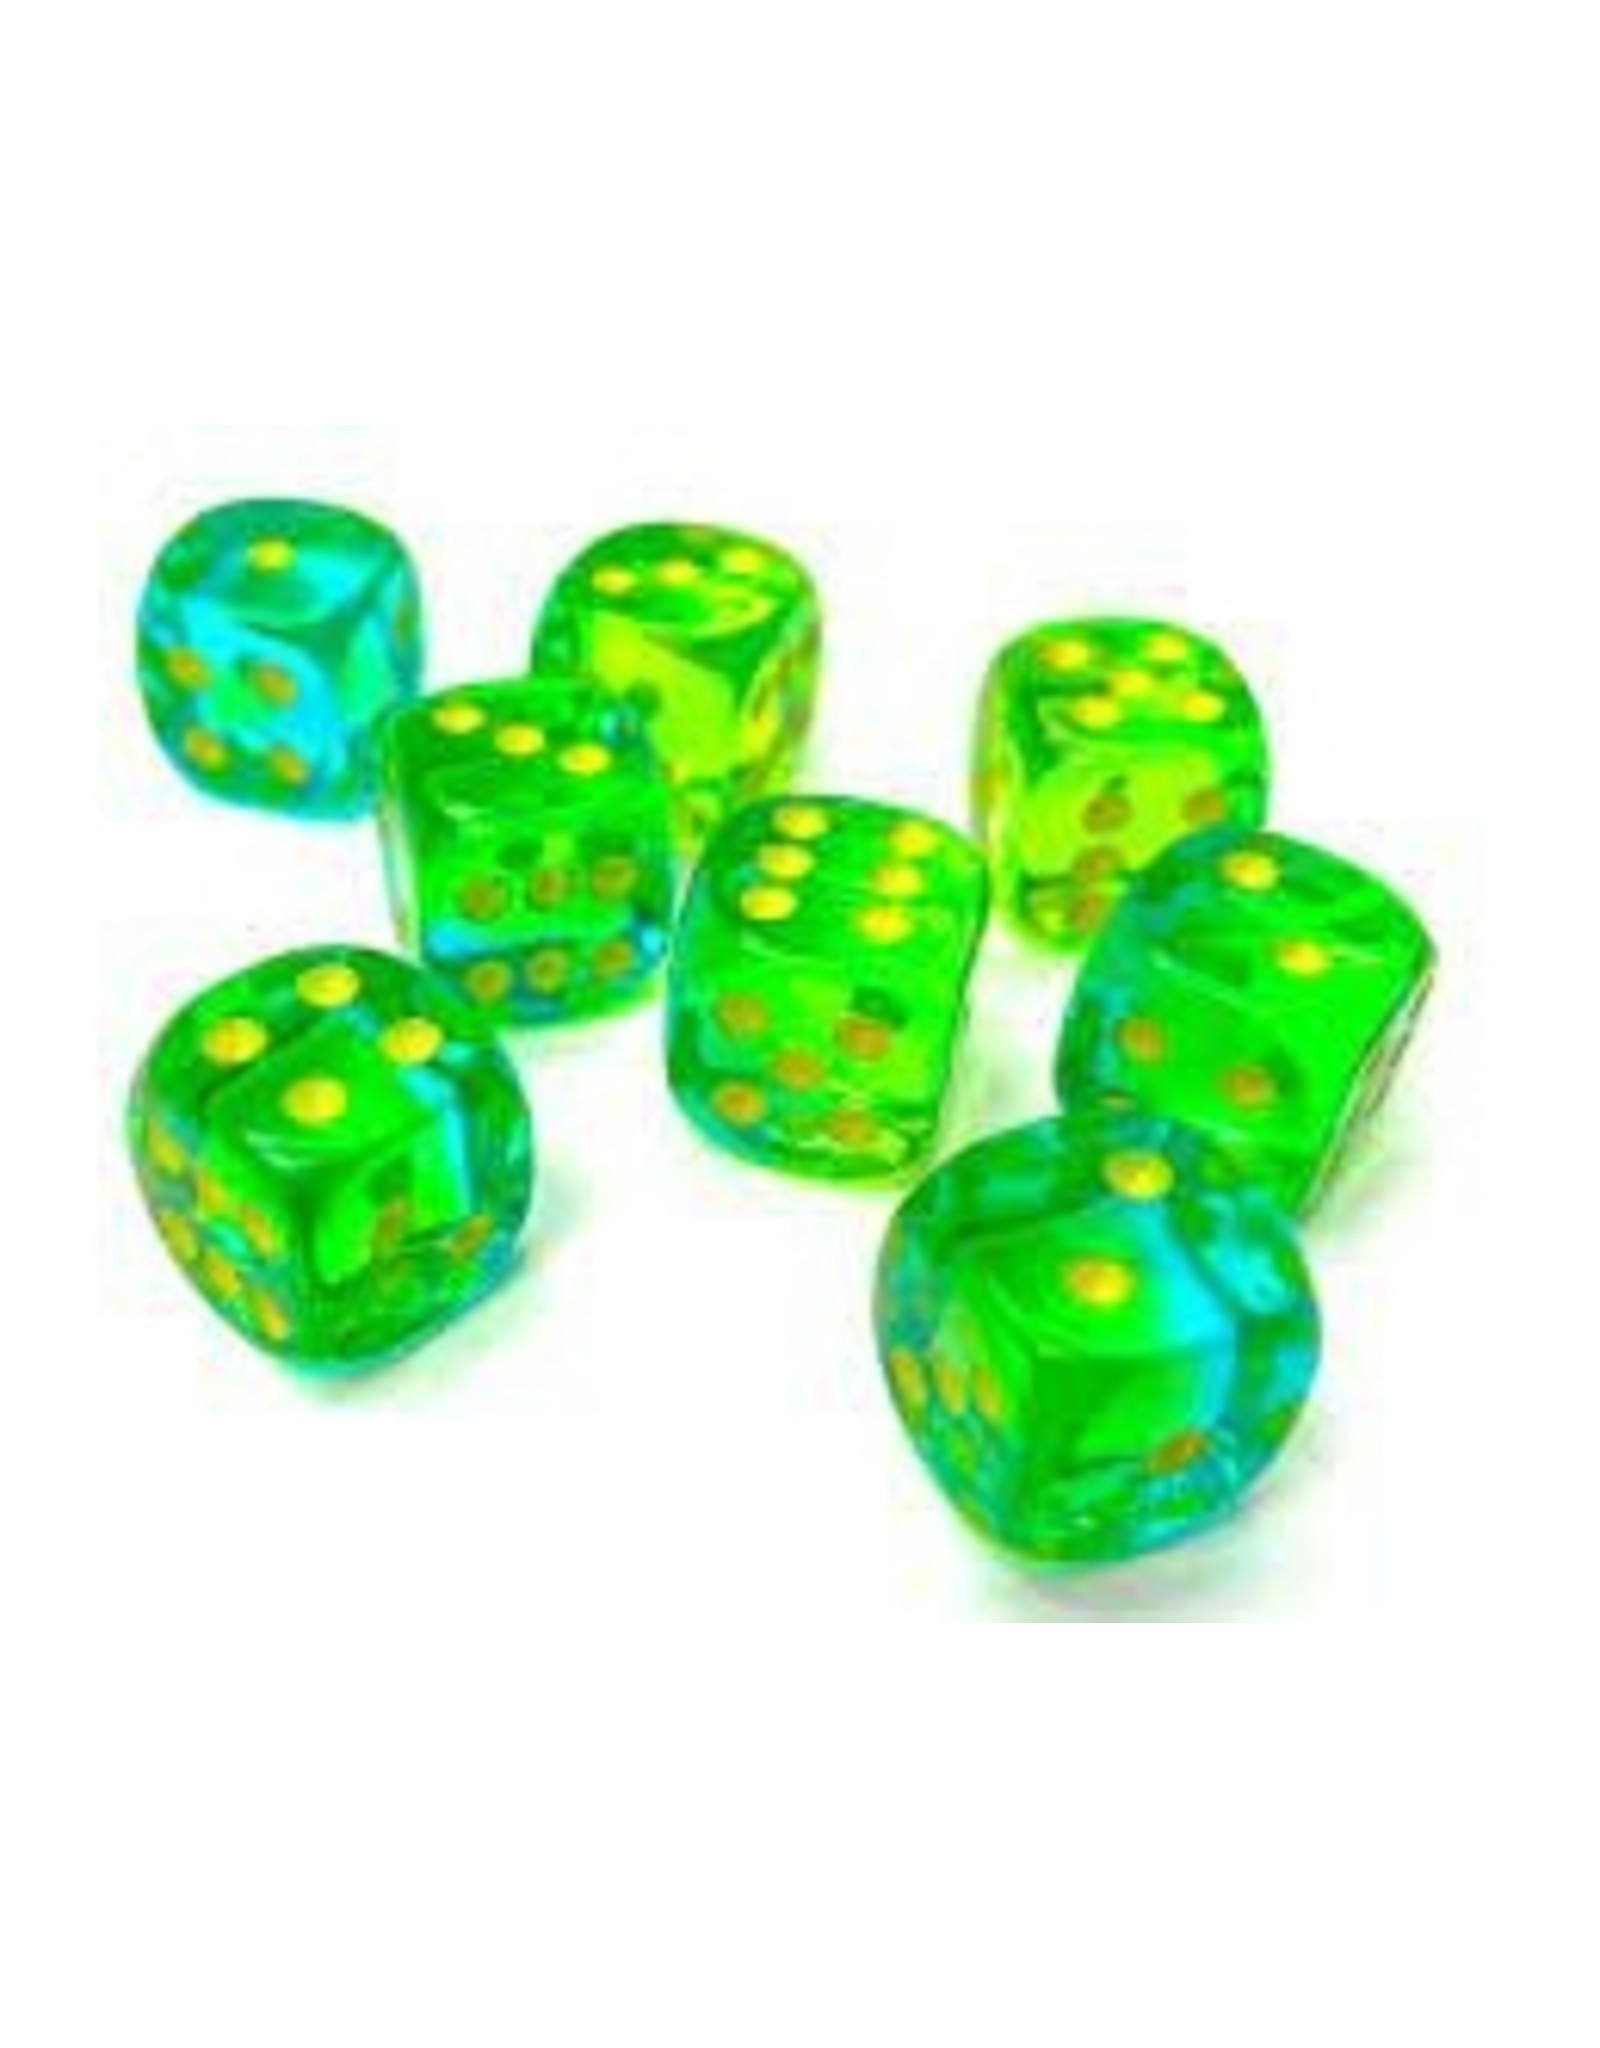 Chessex d6 Cube 12mm Gemini Translucent Green-Teal with Yellow (36)